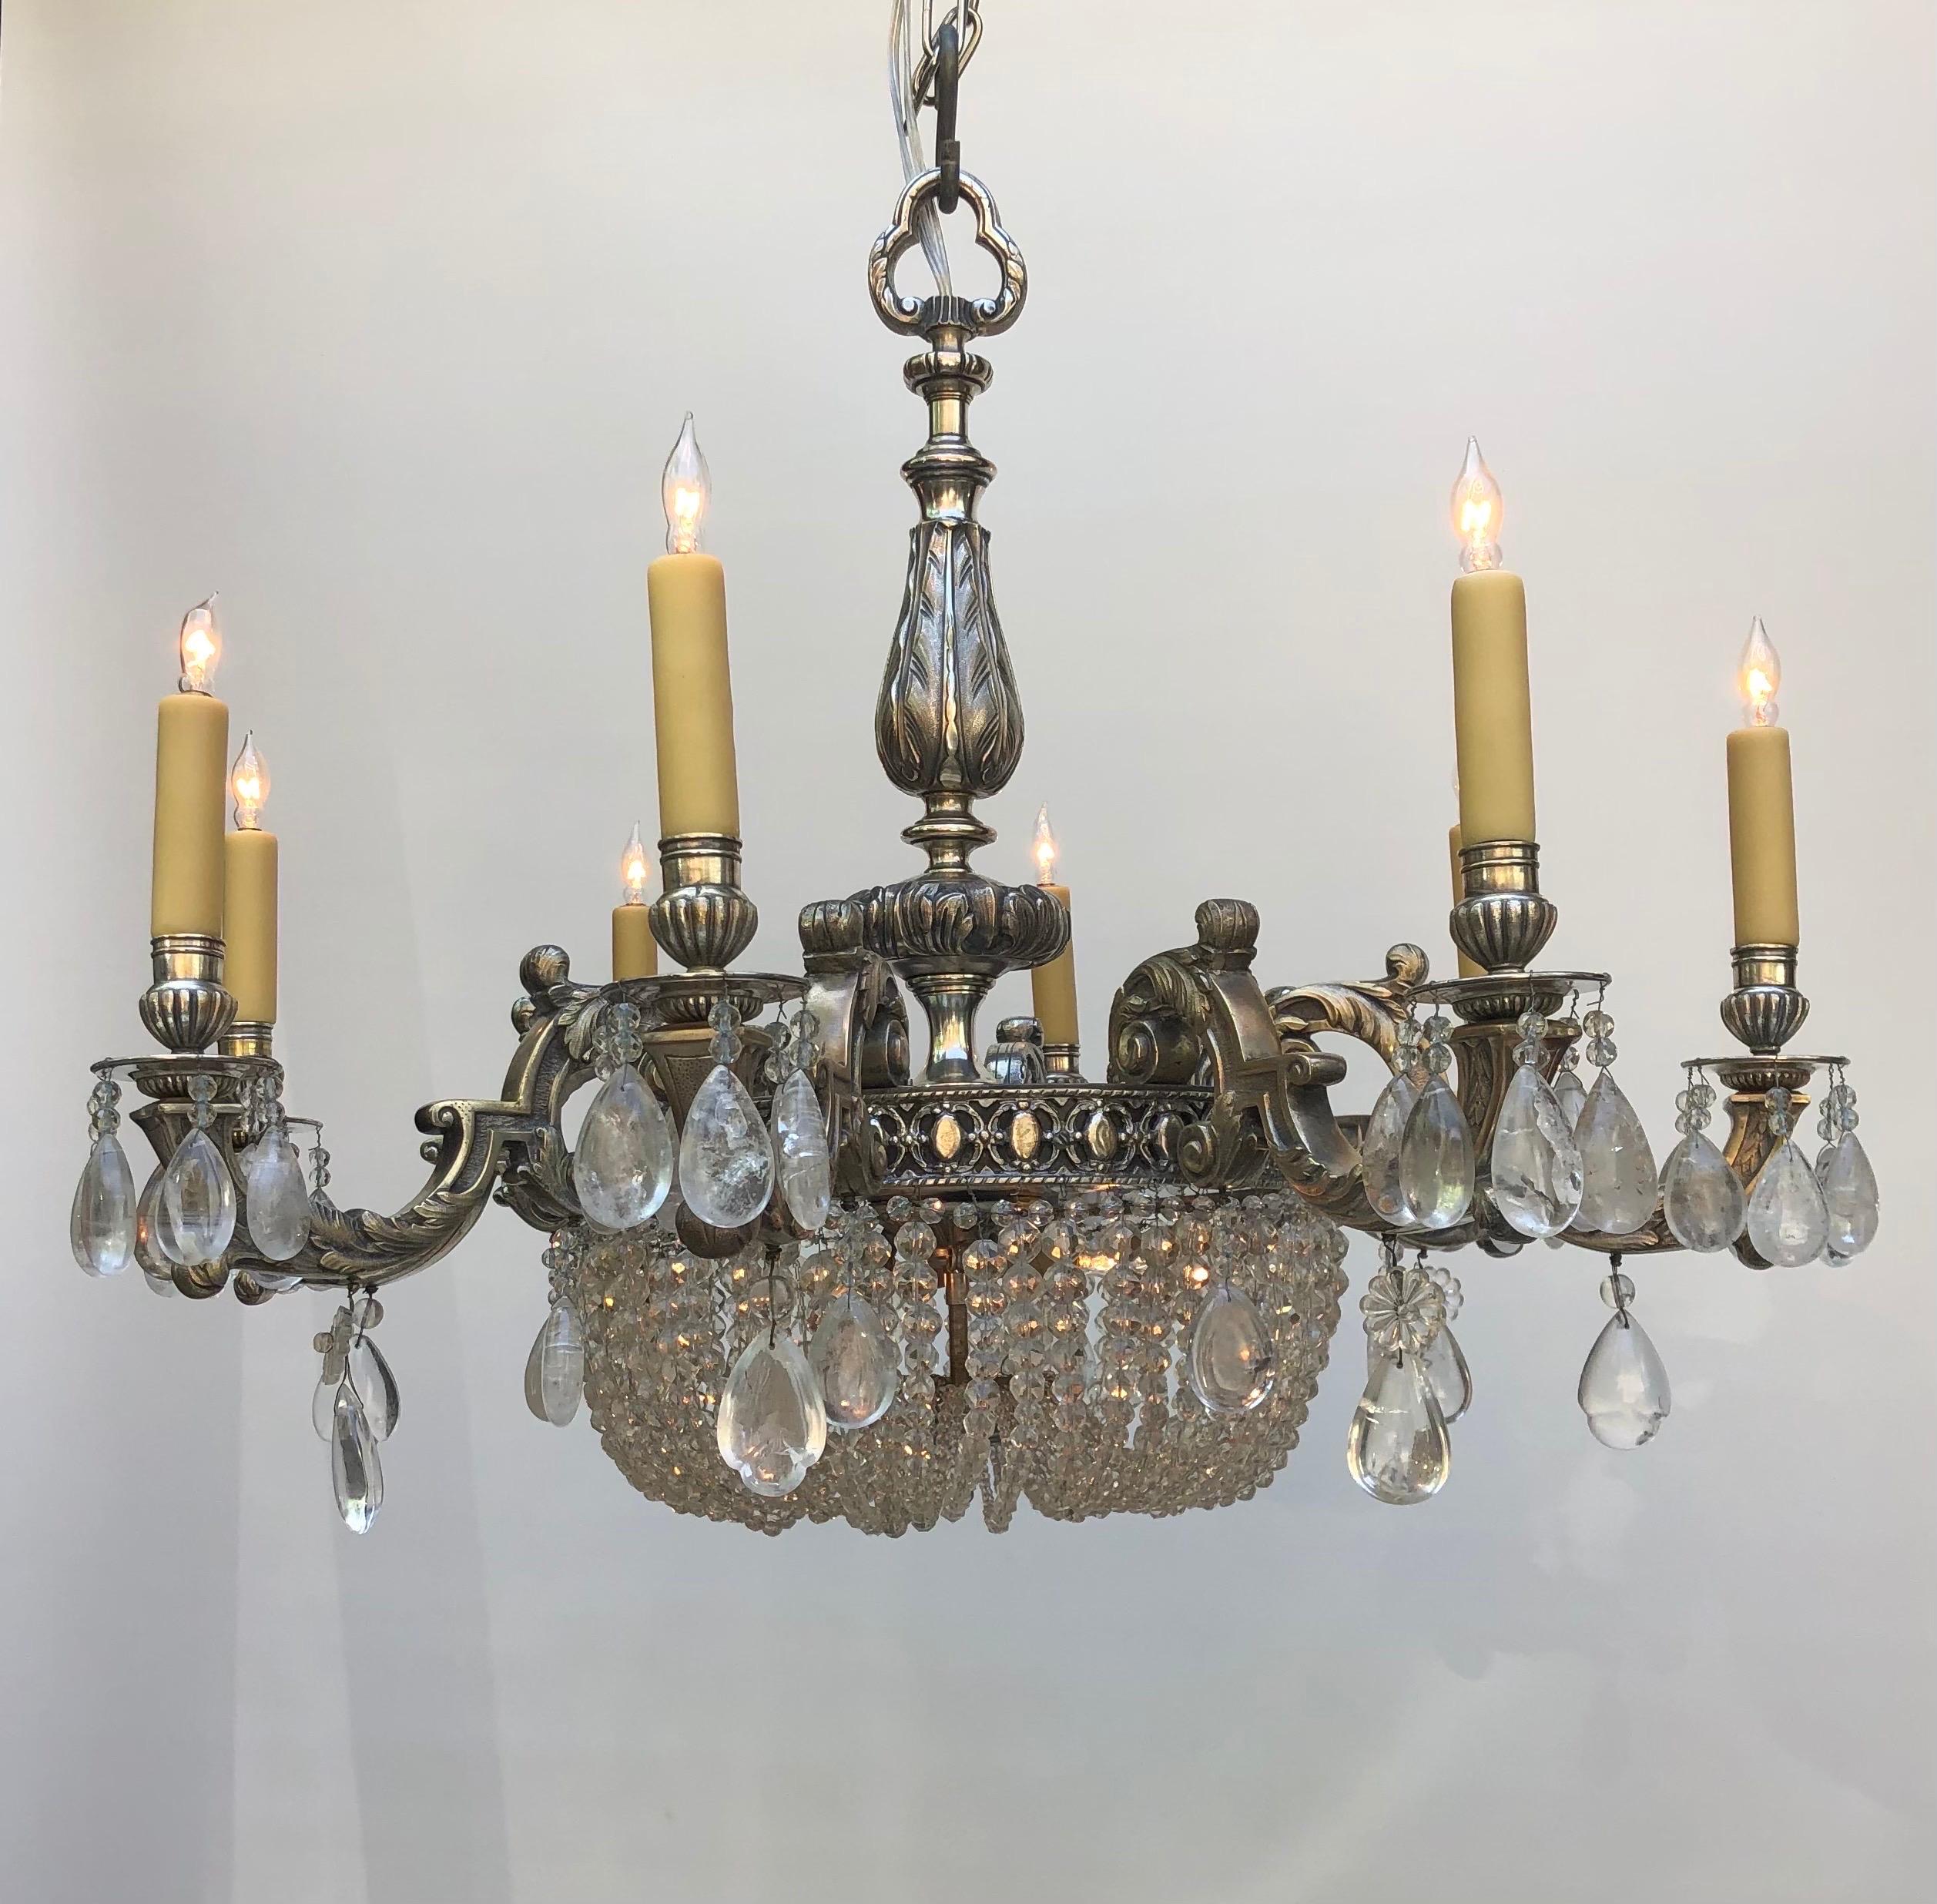 Belle Époque Rock Crystal Silver-Plated Bronze Chandelier, Early 20th Century For Sale 7